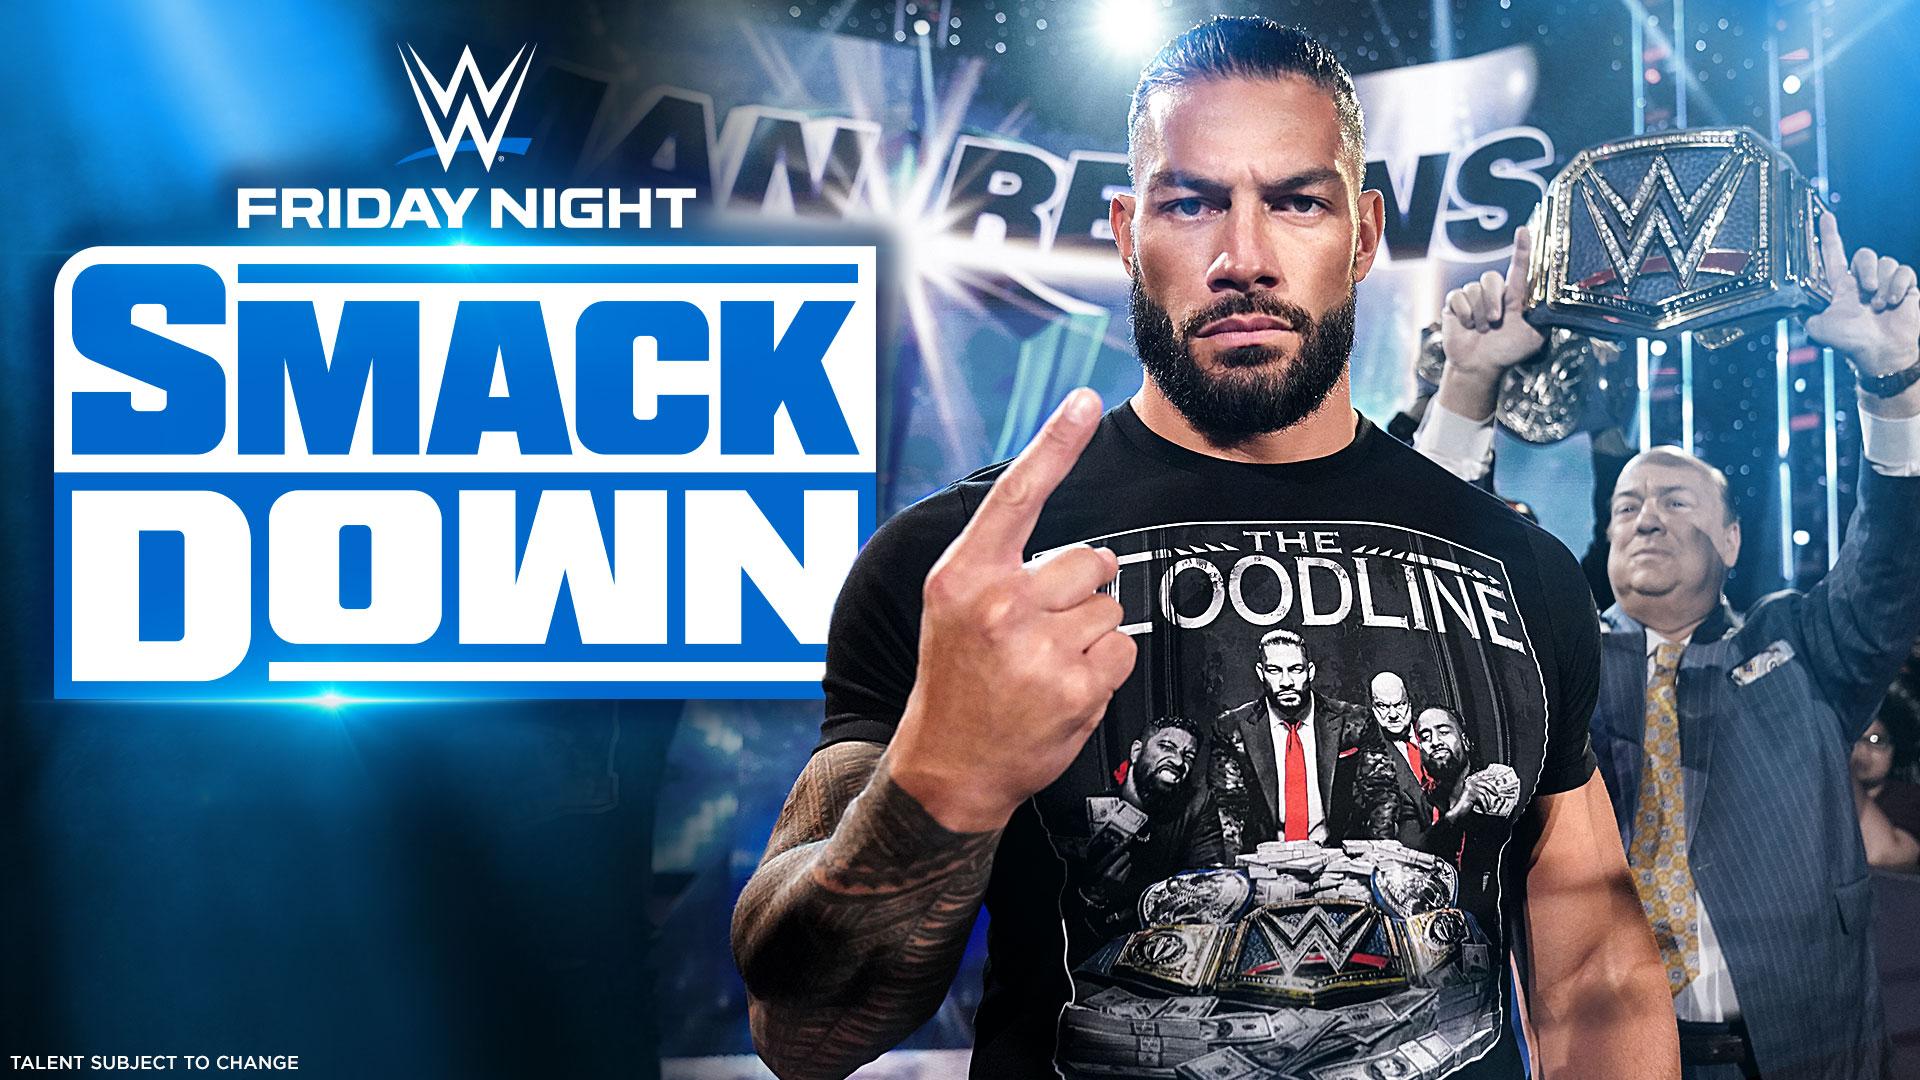 WWE SmackDown Preview For Tonight: Possible Return, The bloodline And The New Era Inc